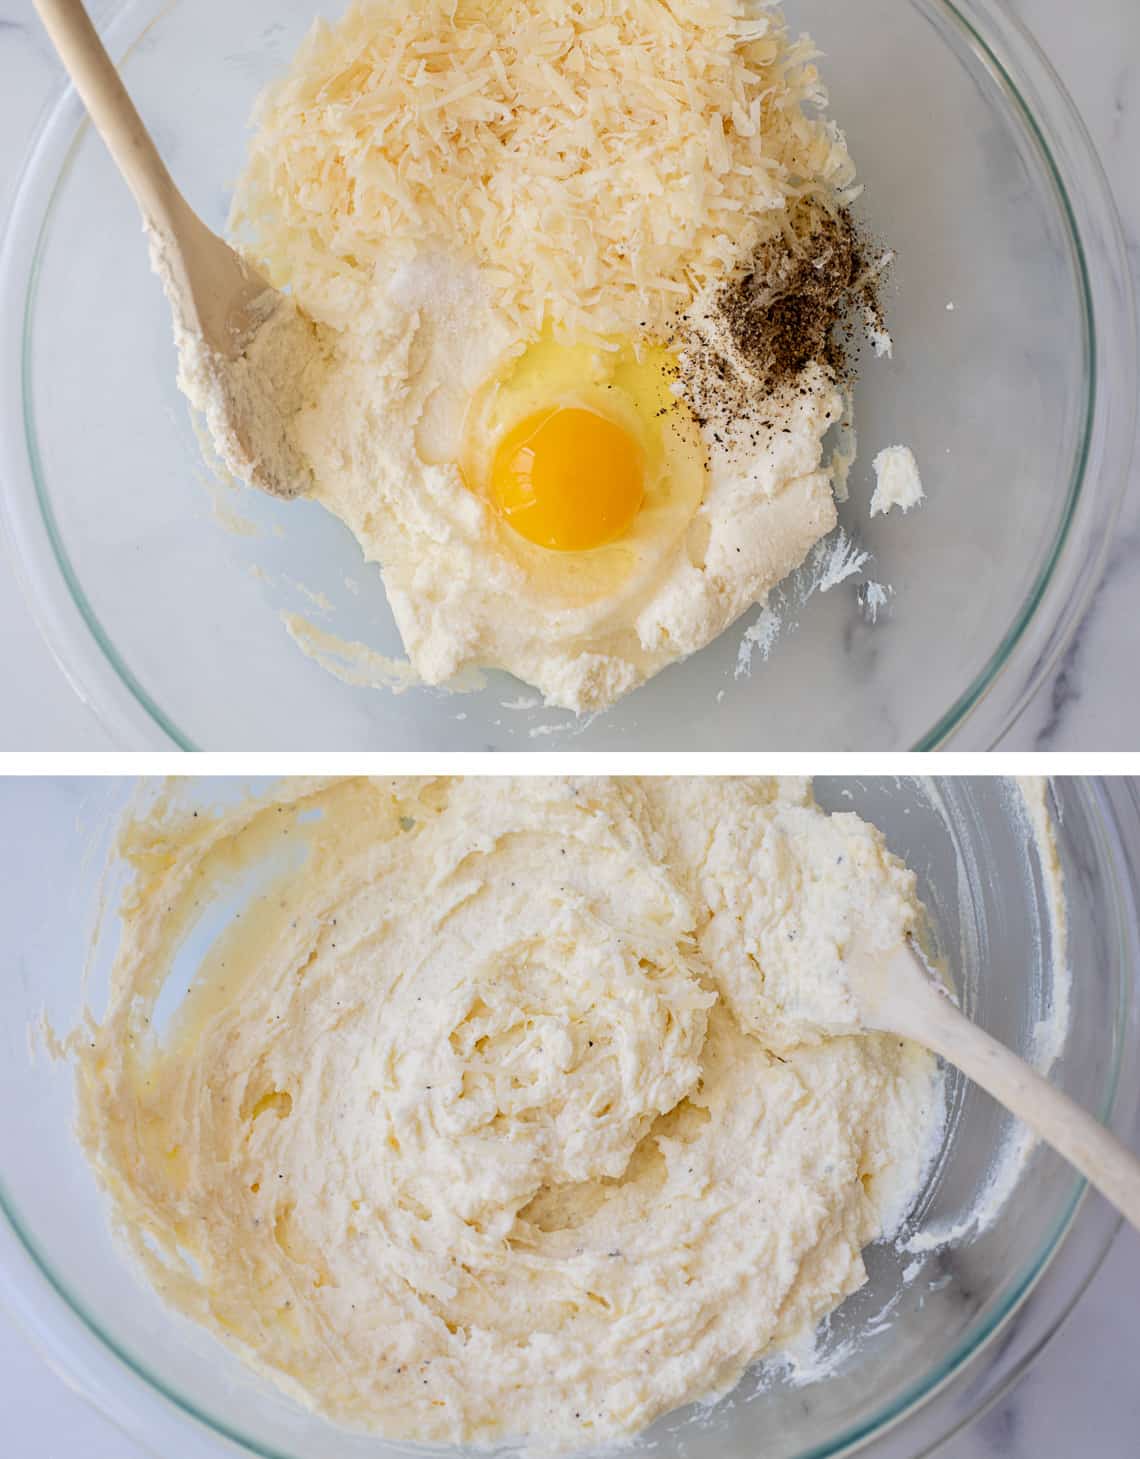 bowl of ricotta, egg, parmesan, and pepper, then a bowl of it all mixed together.